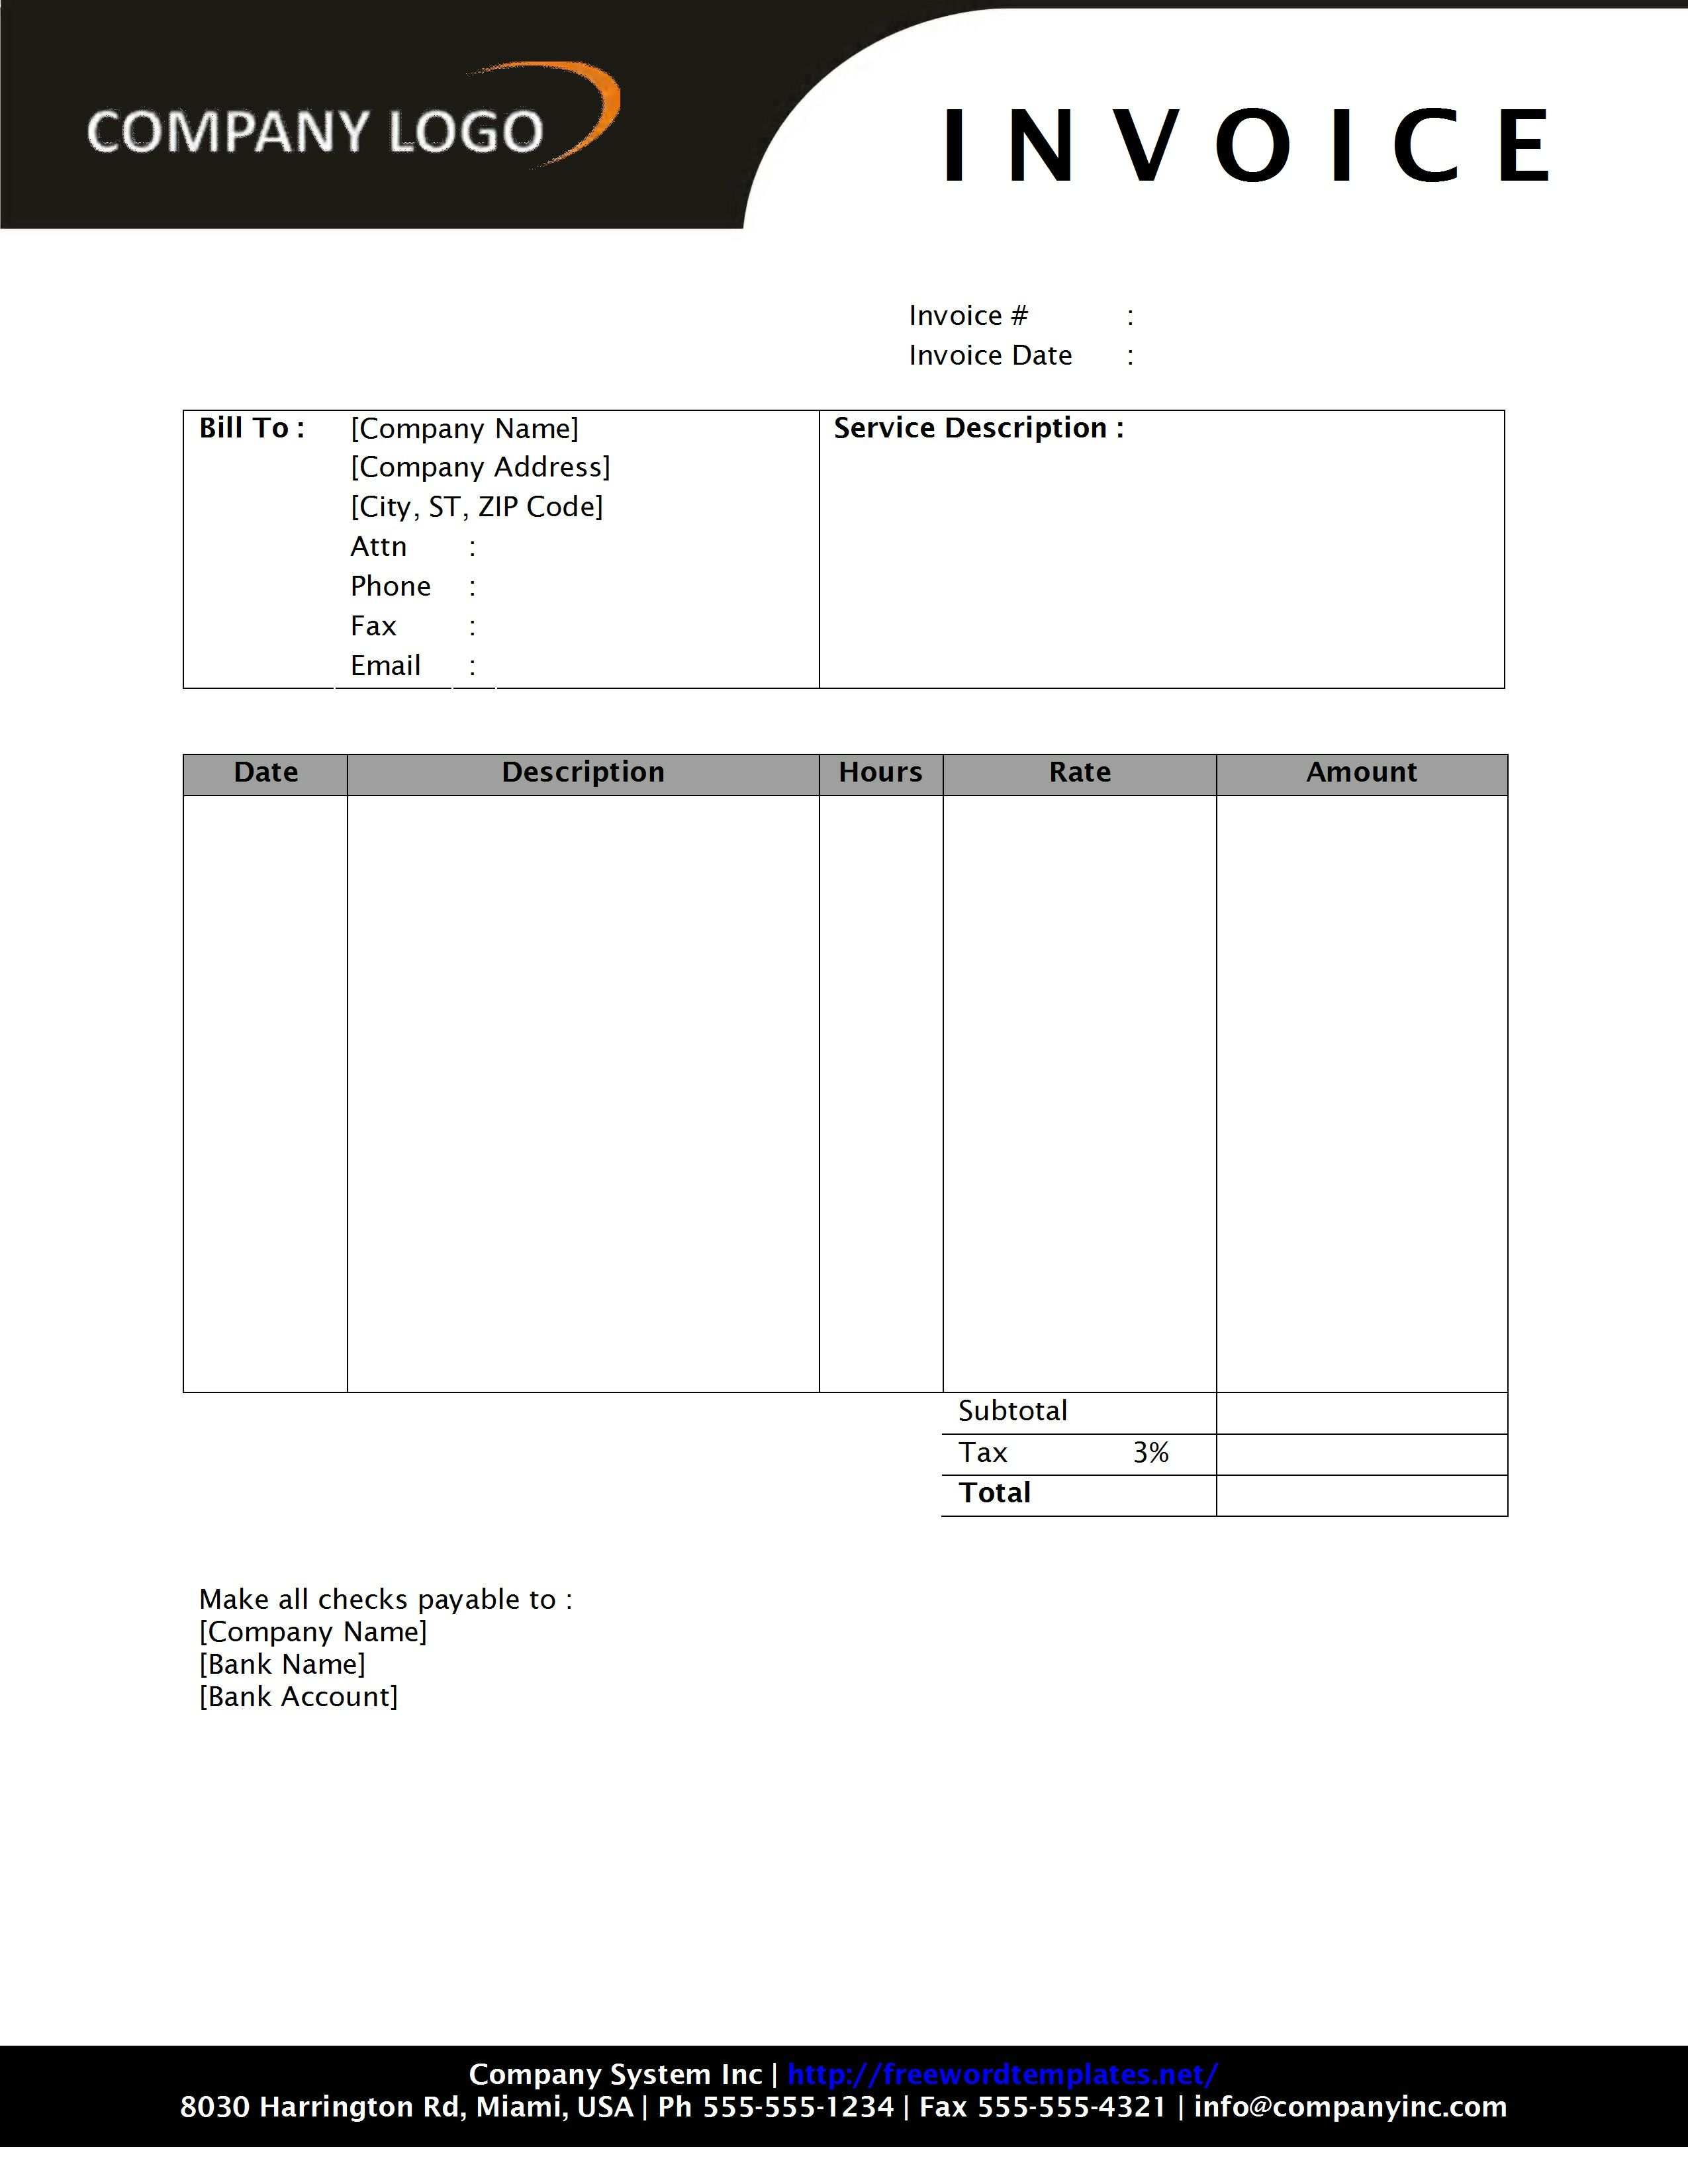 invoice-template-for-designers